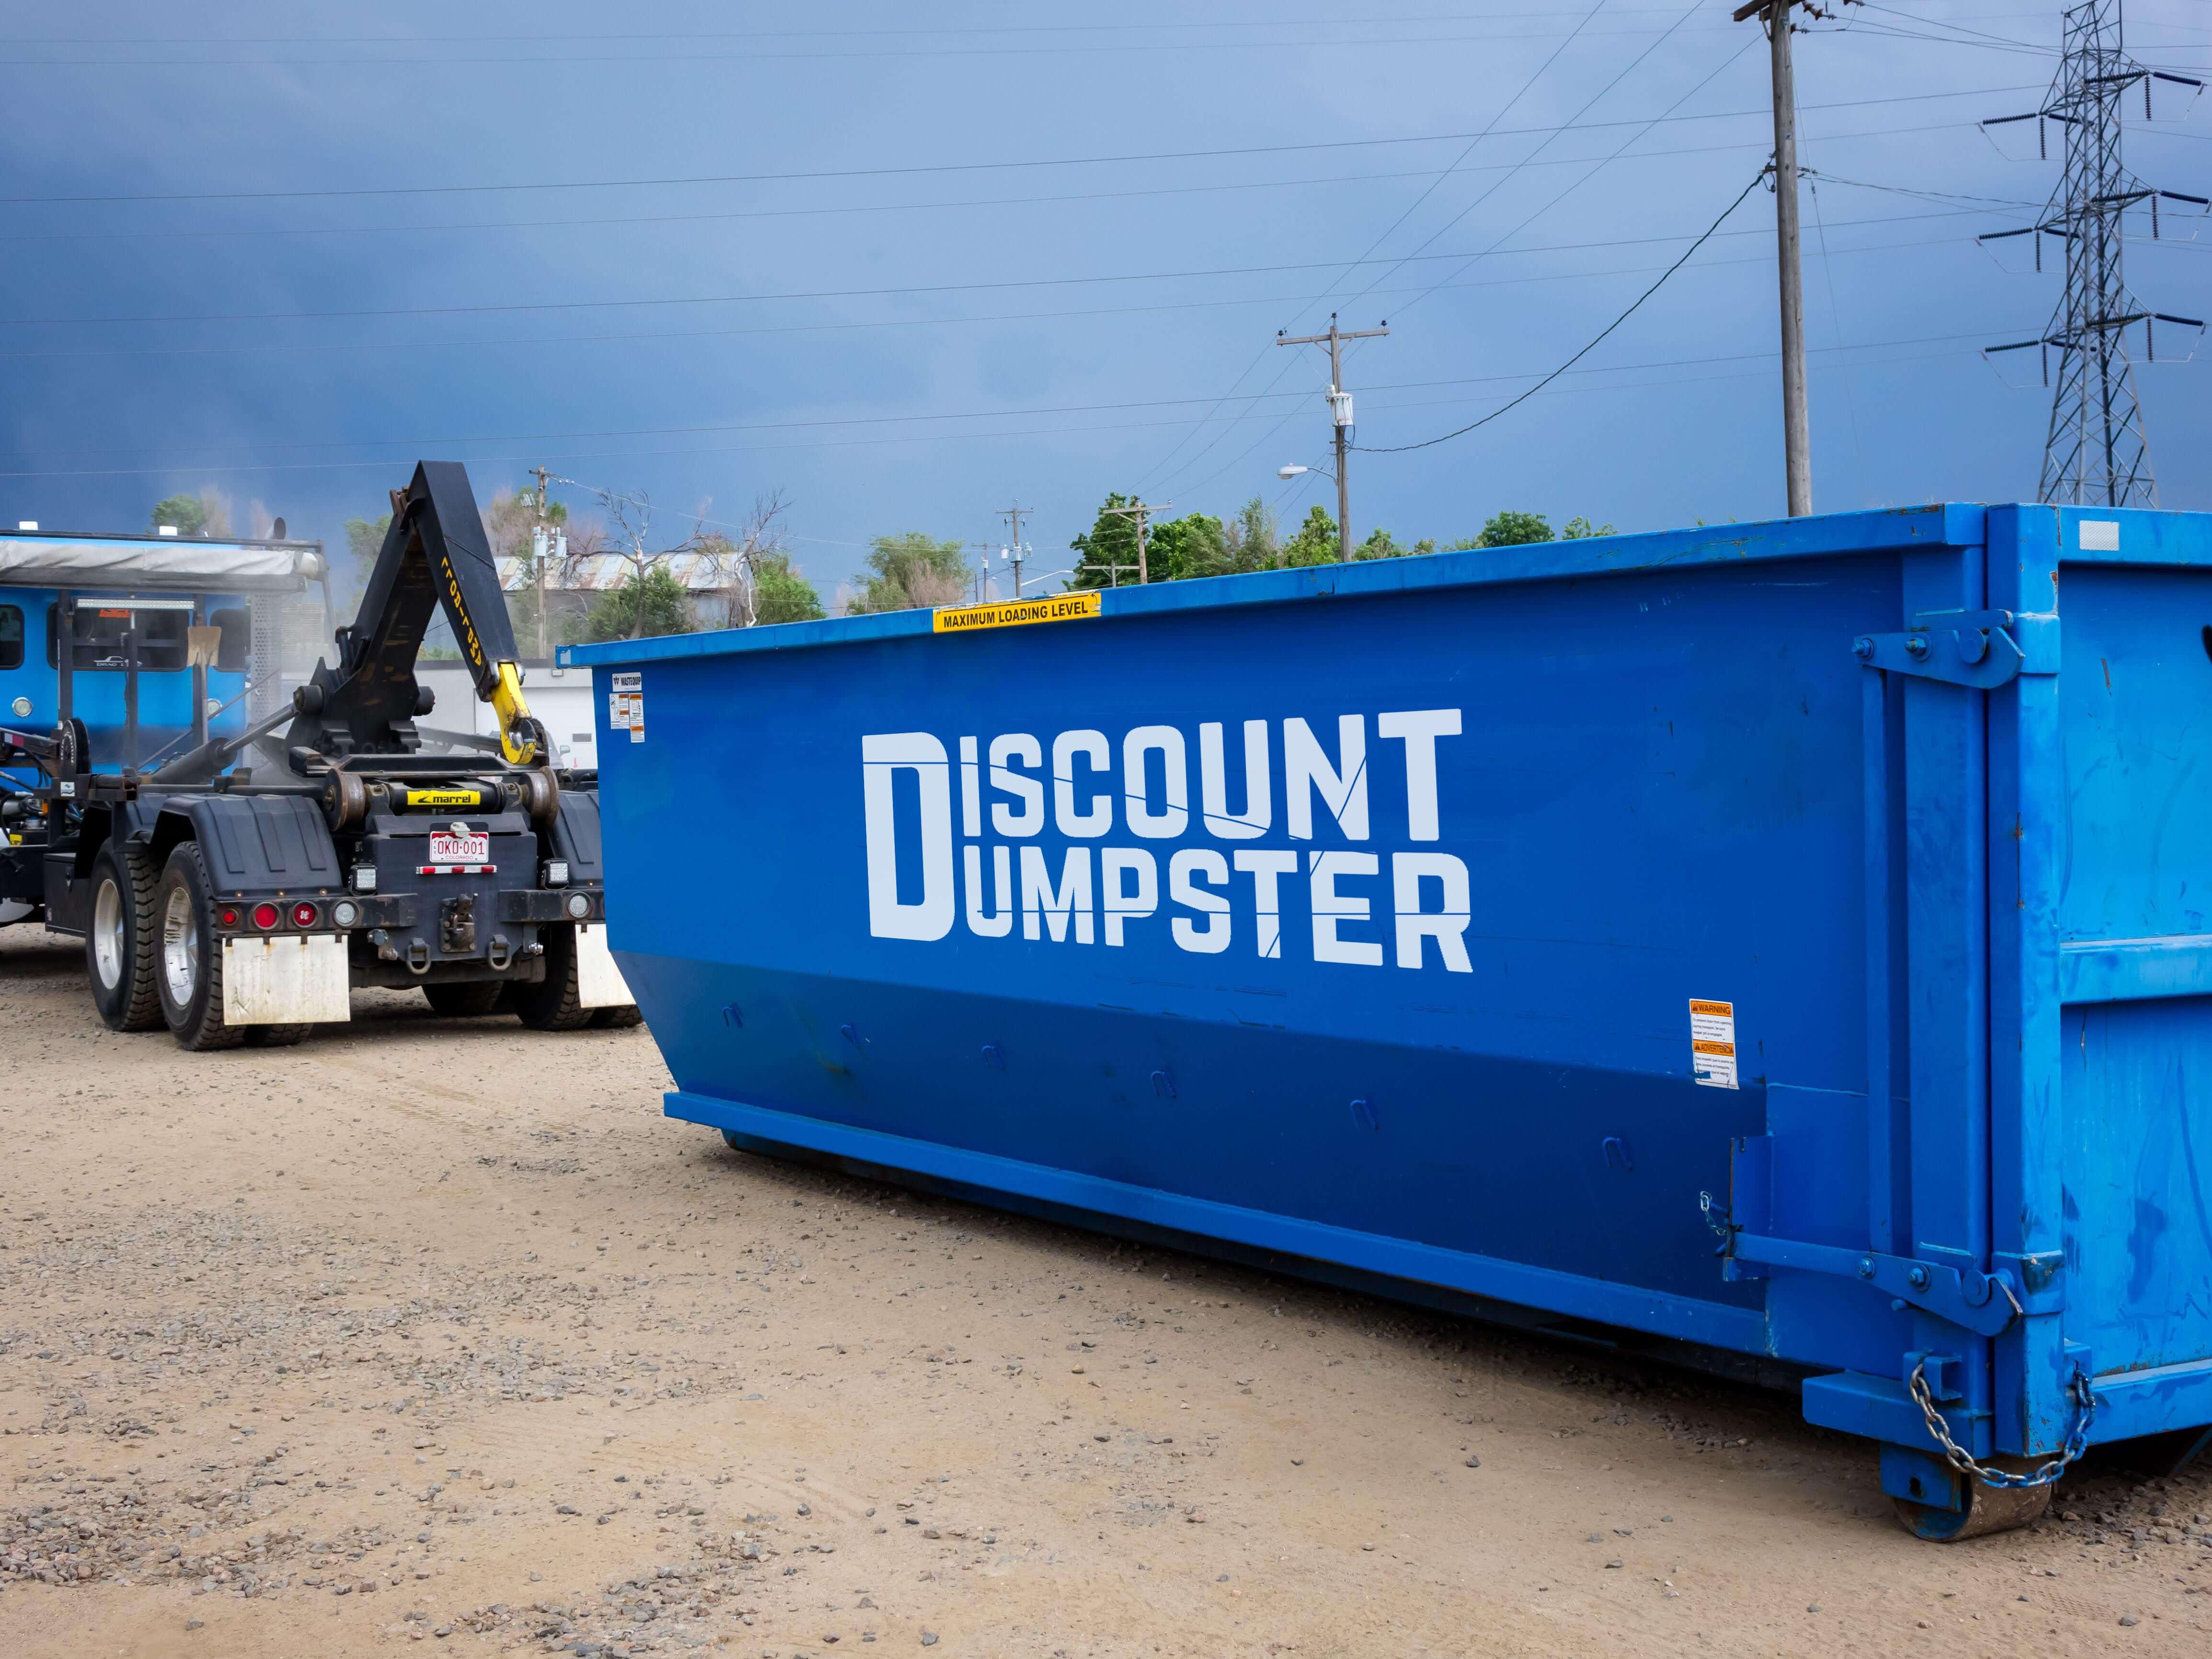 Discount dumpster is proud to serve the chicago il area with our high quality dumpster rentals and w Discount Dumpster Chicago (312)549-9198